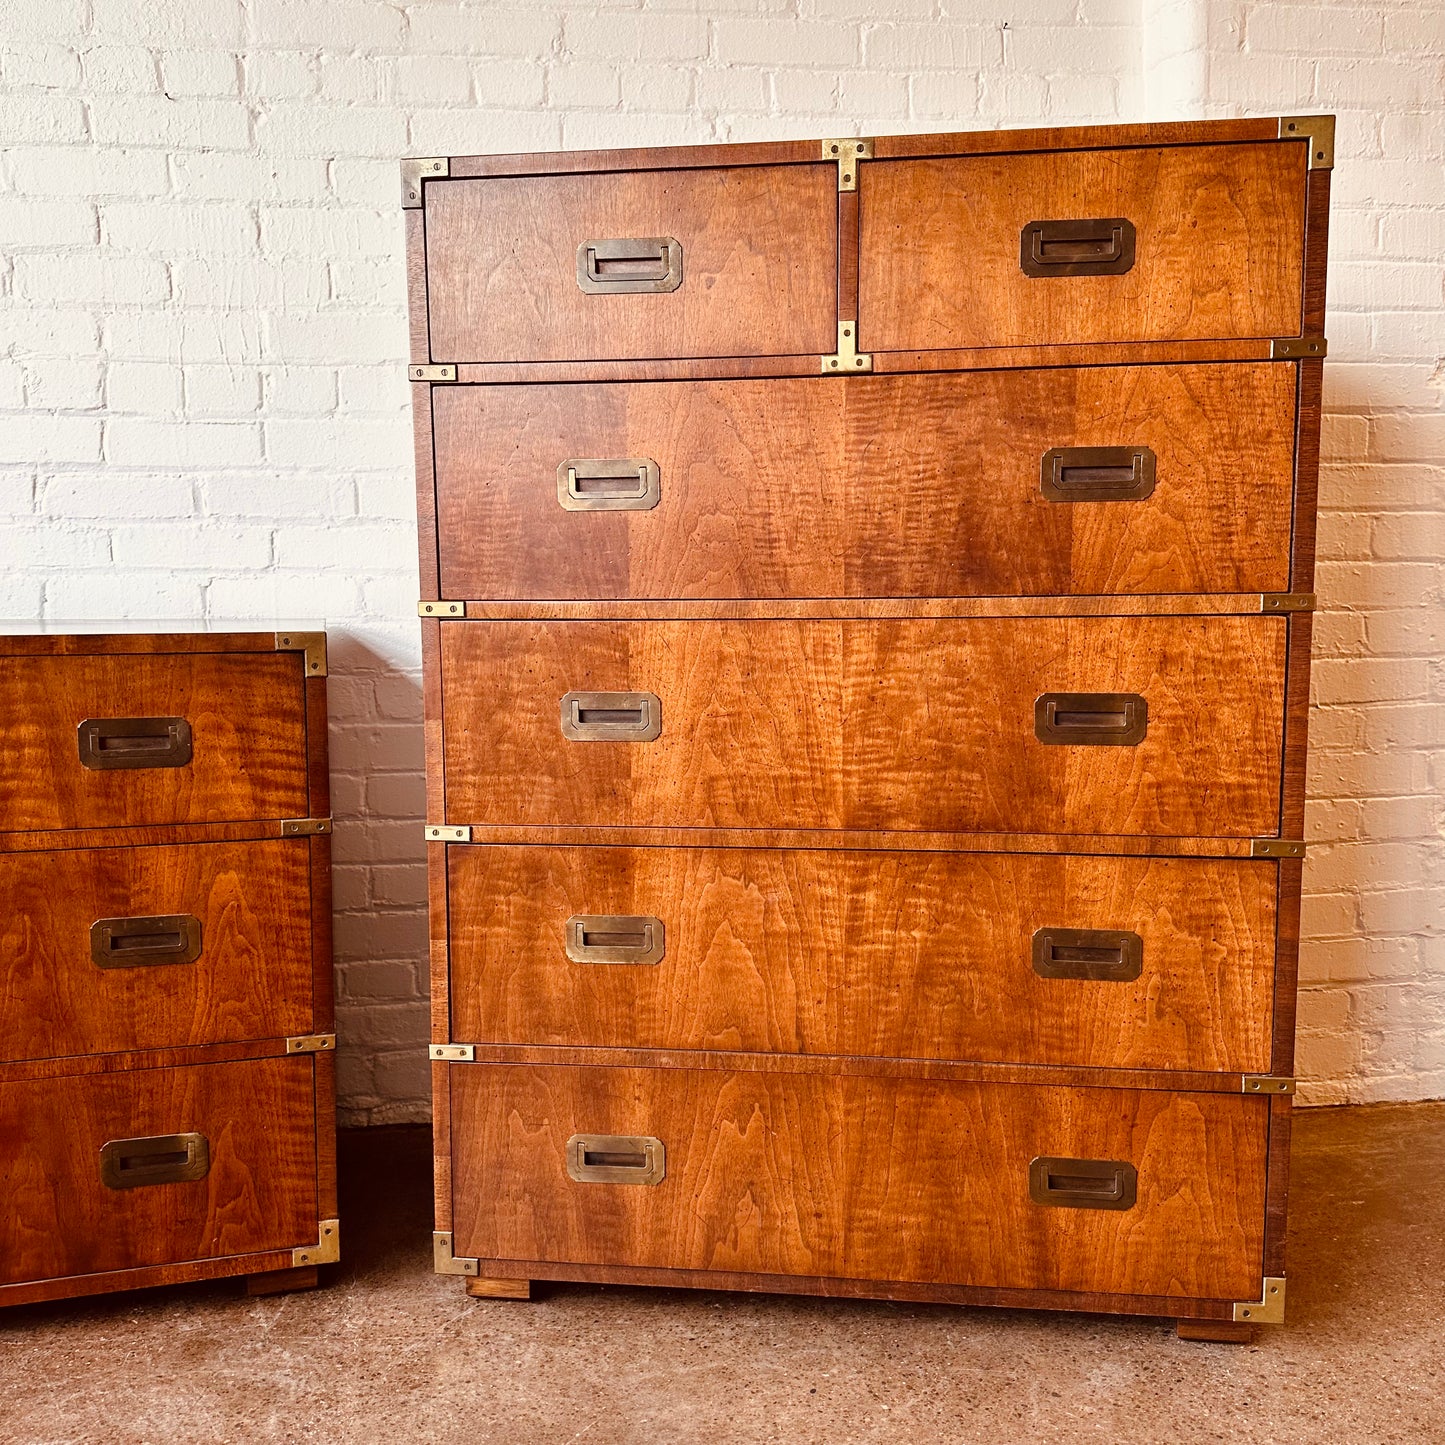 HENREDON CAMPAIGN STYLE TALL CHEST OF DRAWERS